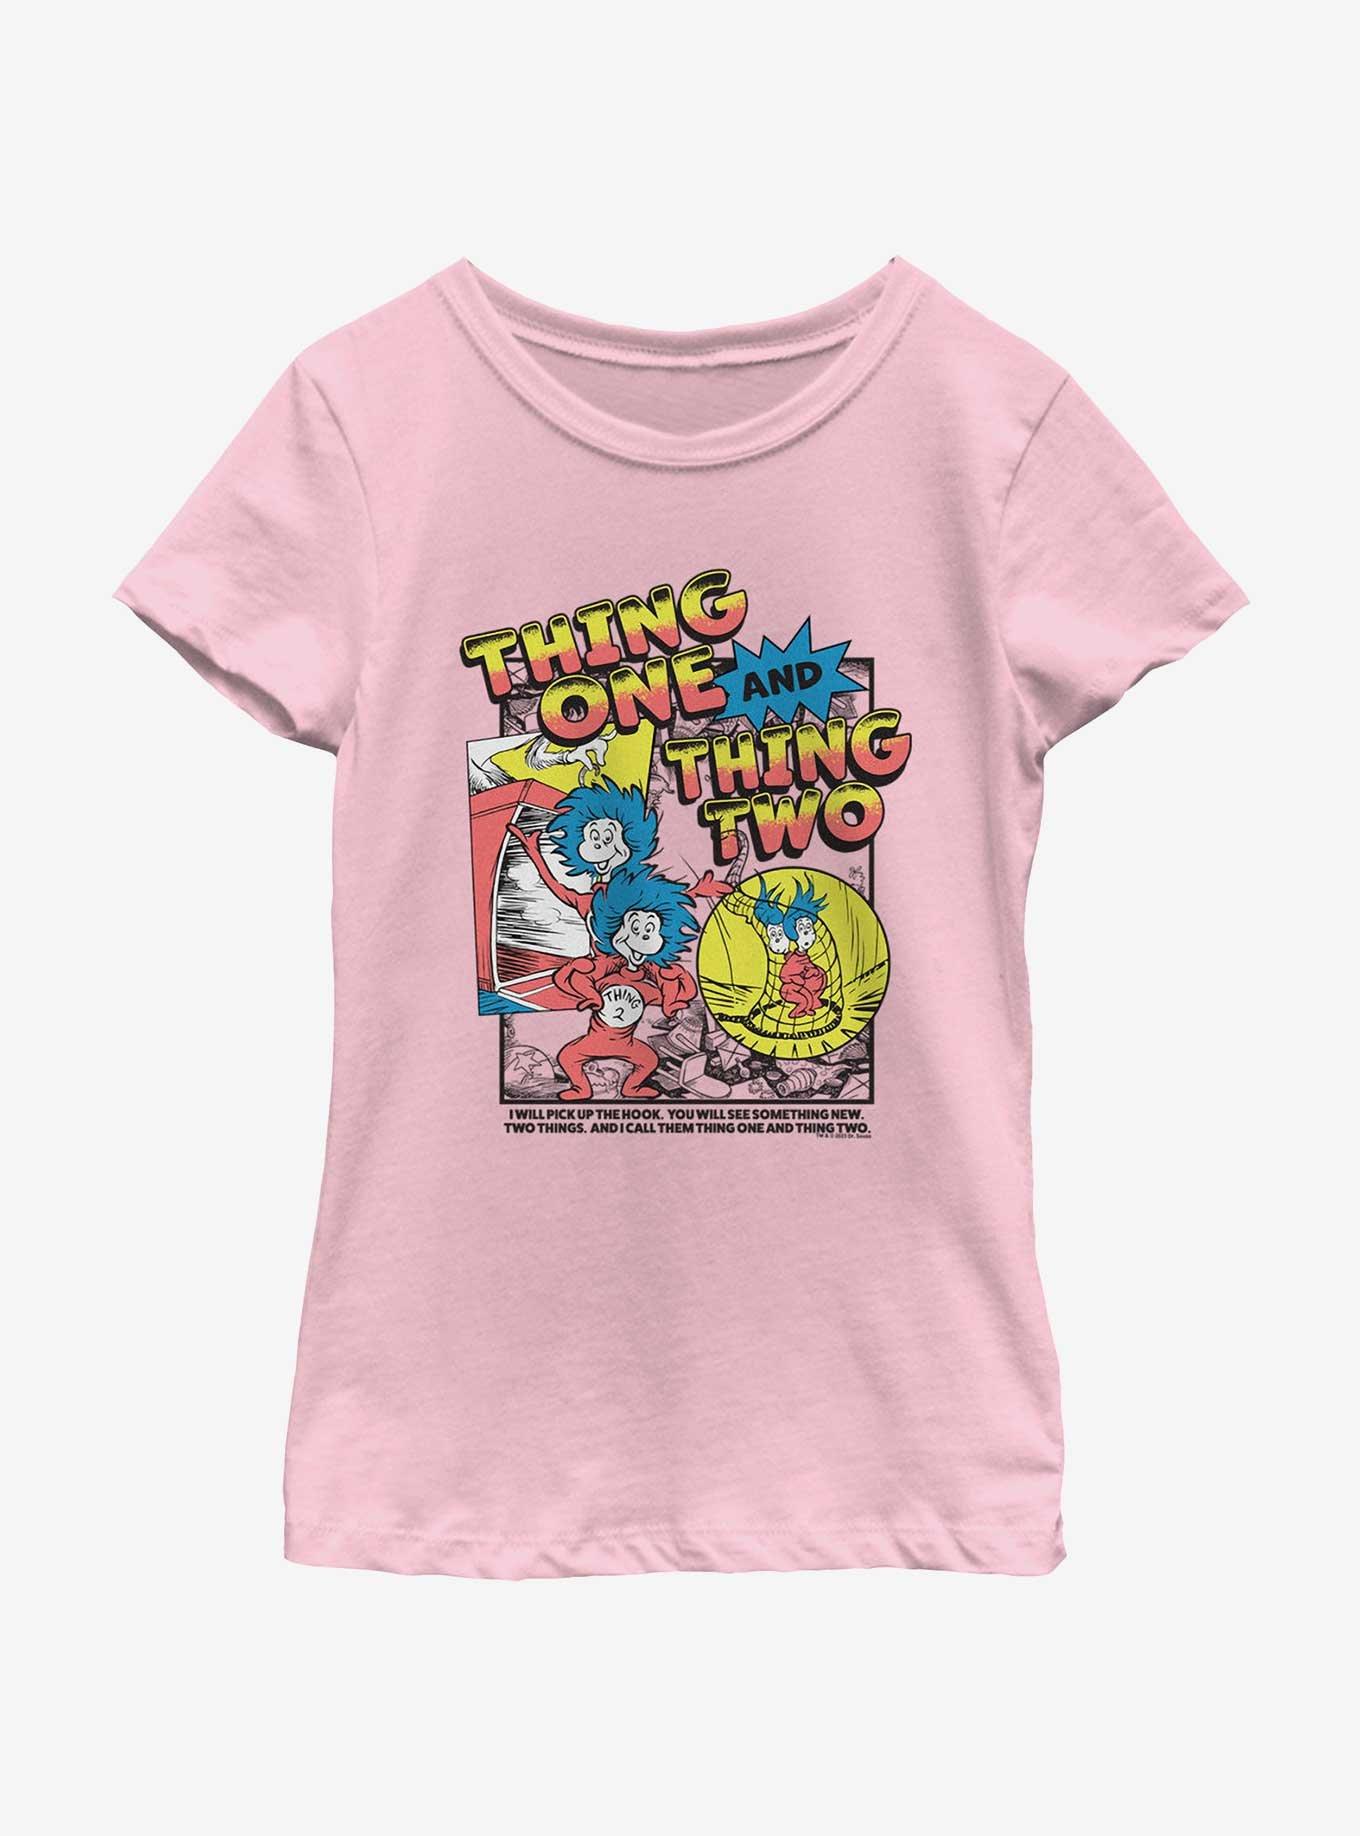 Dr. Seuss's Cat In The Hat Thing One And Thing Two Comic Art Youth Girls T-Shirt, PINK, hi-res